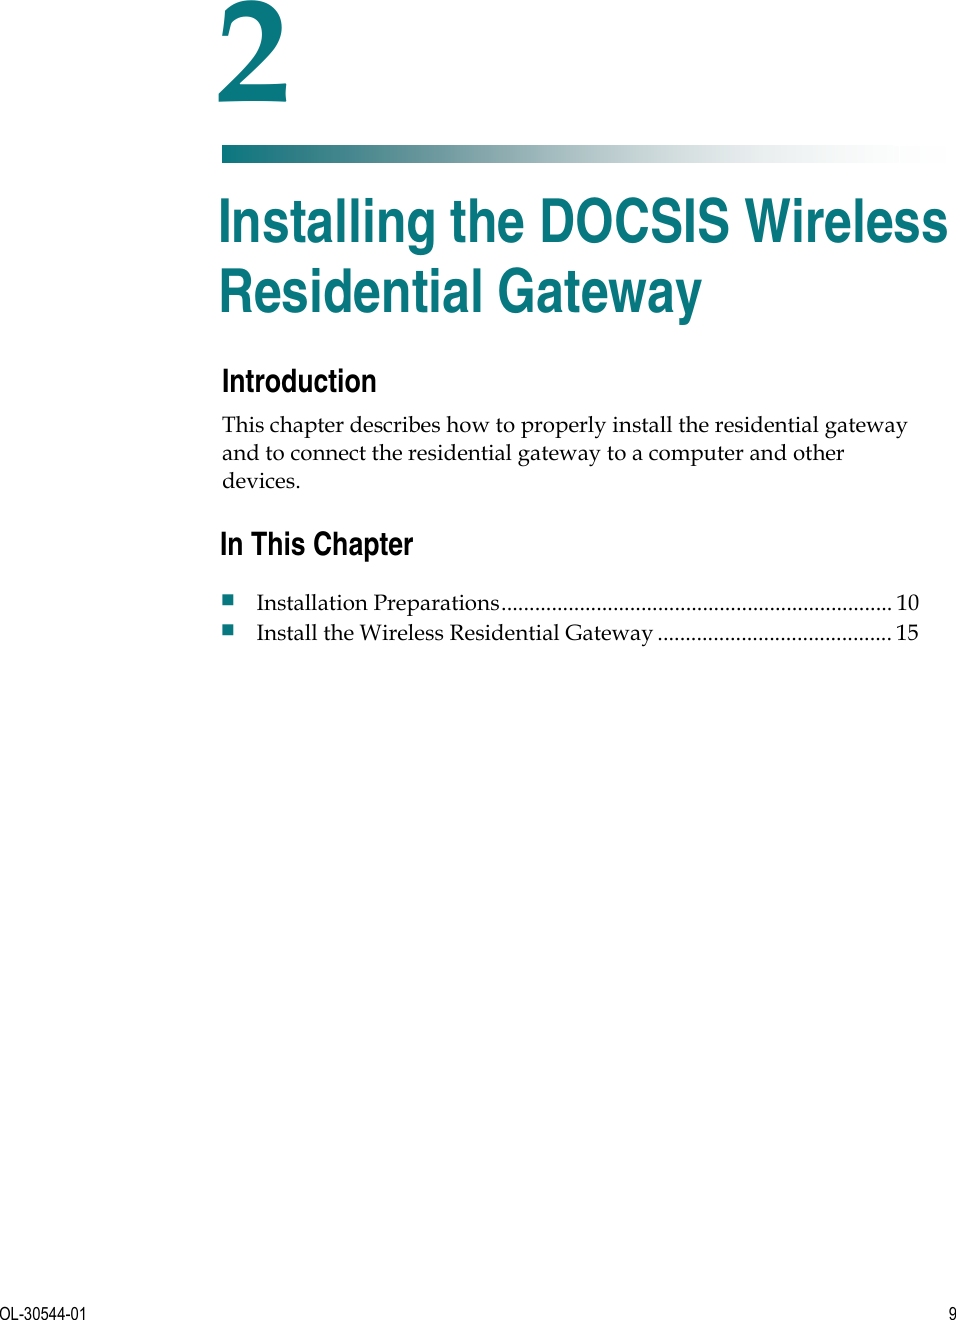   OL-30544-01  9  Introduction This chapter describes how to properly install the residential gateway and to connect the residential gateway to a computer and other devices.    2 Chapter 2 Installing the DOCSIS Wireless Residential Gateway In This Chapter Installation Preparations...................................................................... 10 Install the Wireless Residential Gateway .......................................... 15 